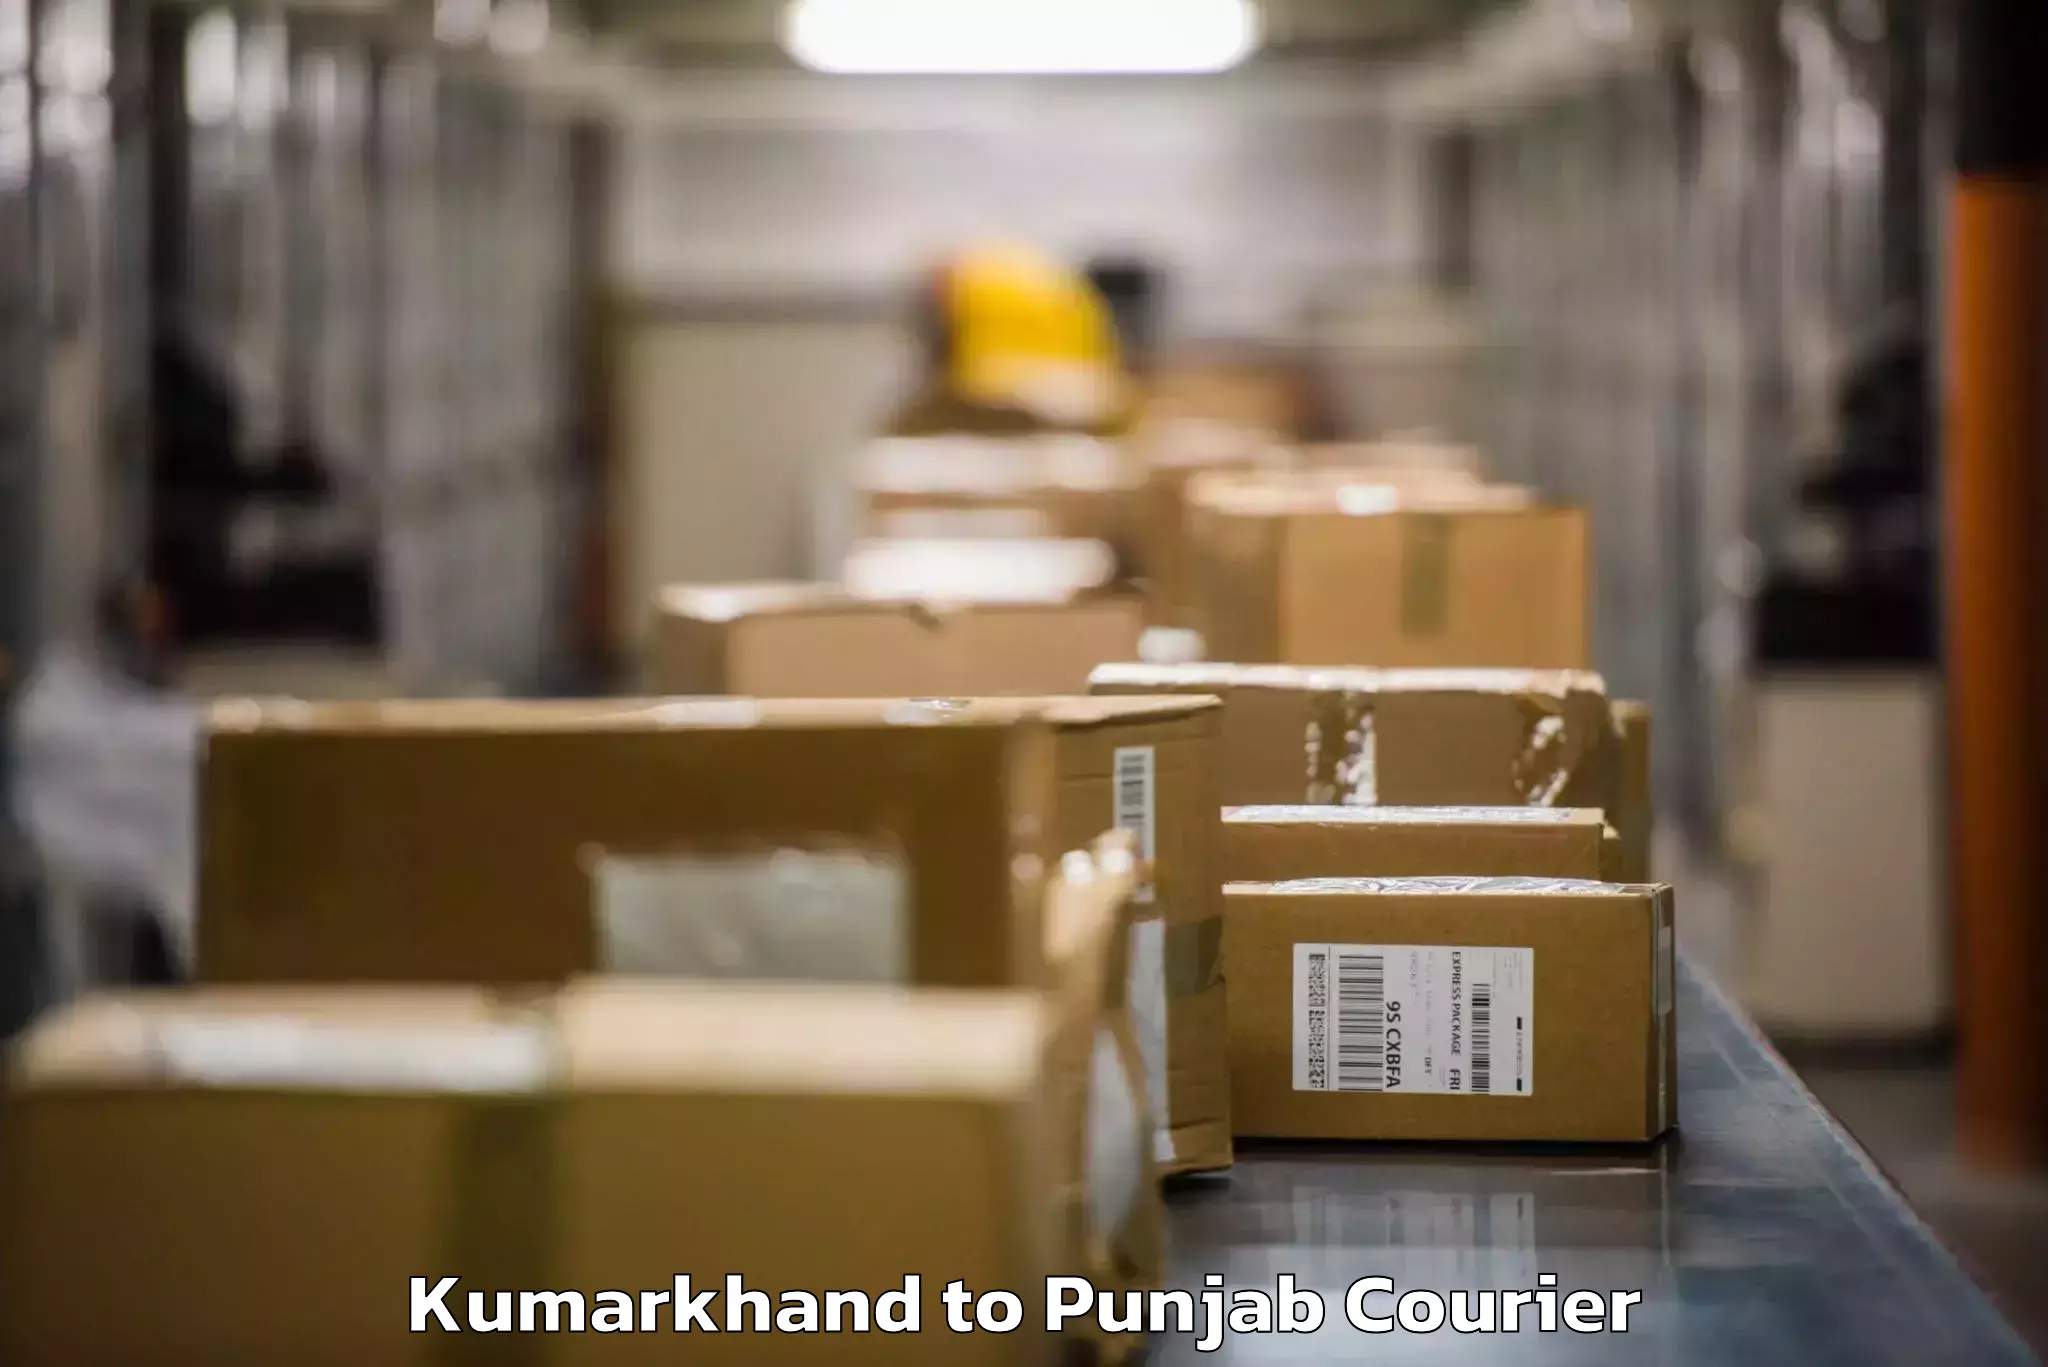 Baggage transport innovation in Kumarkhand to Punjab